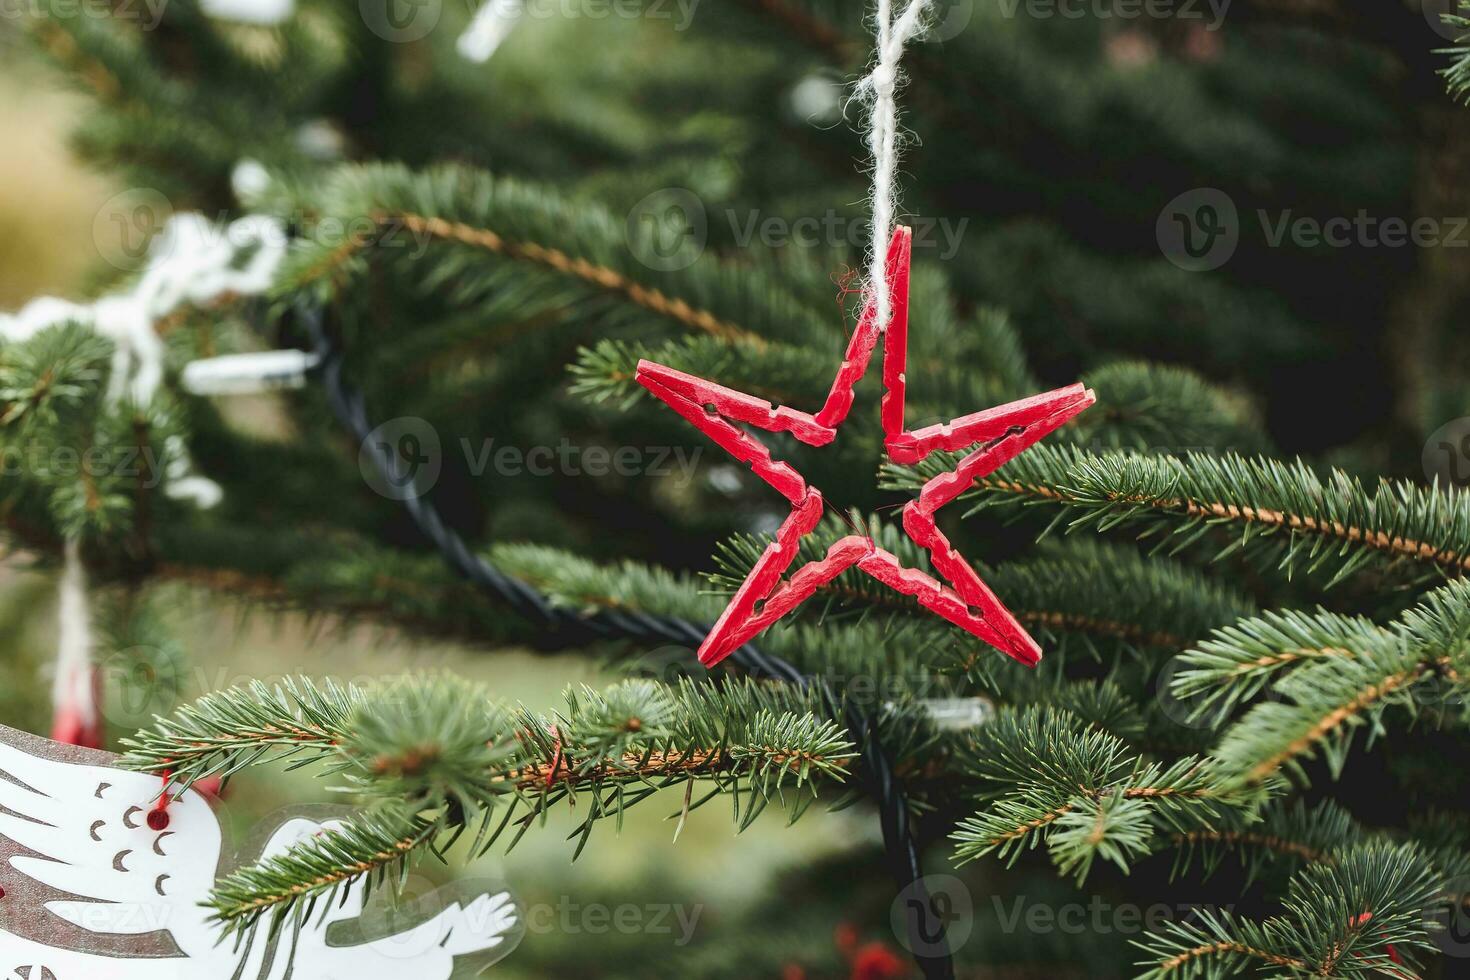 Red handmade star on a Christmas tree outdoor. Diy creative ideas for children. Environment, recycle, upcycling and zero waste concept. Selective focus photo